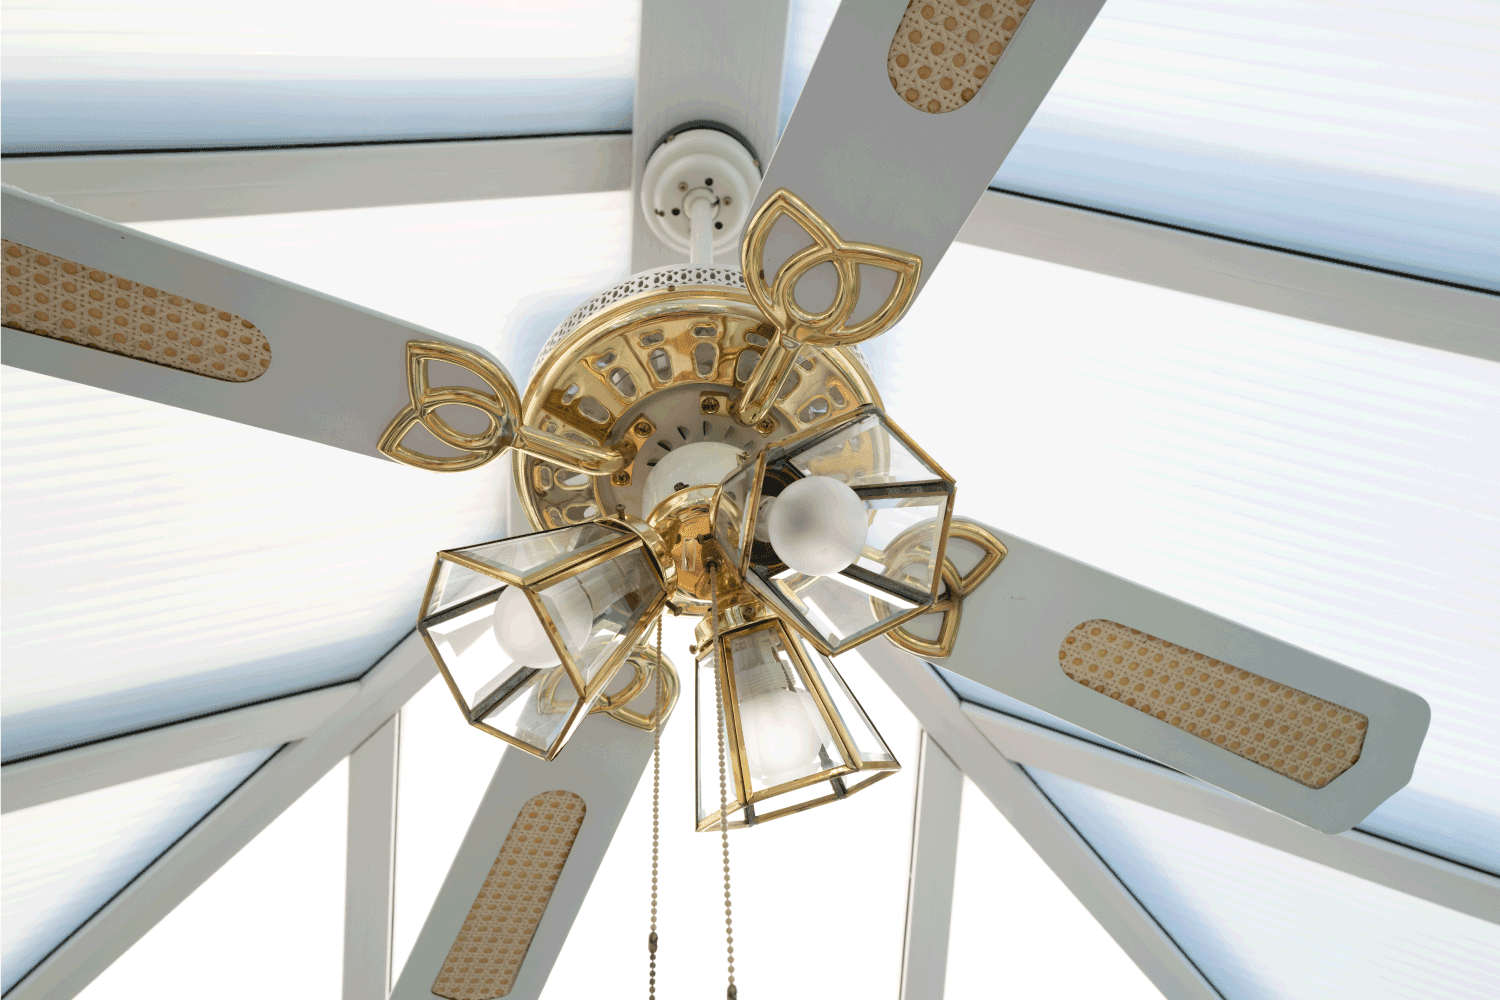 Electric conservatory ceiling fan and combined lighting system seen attached to the sub-frame